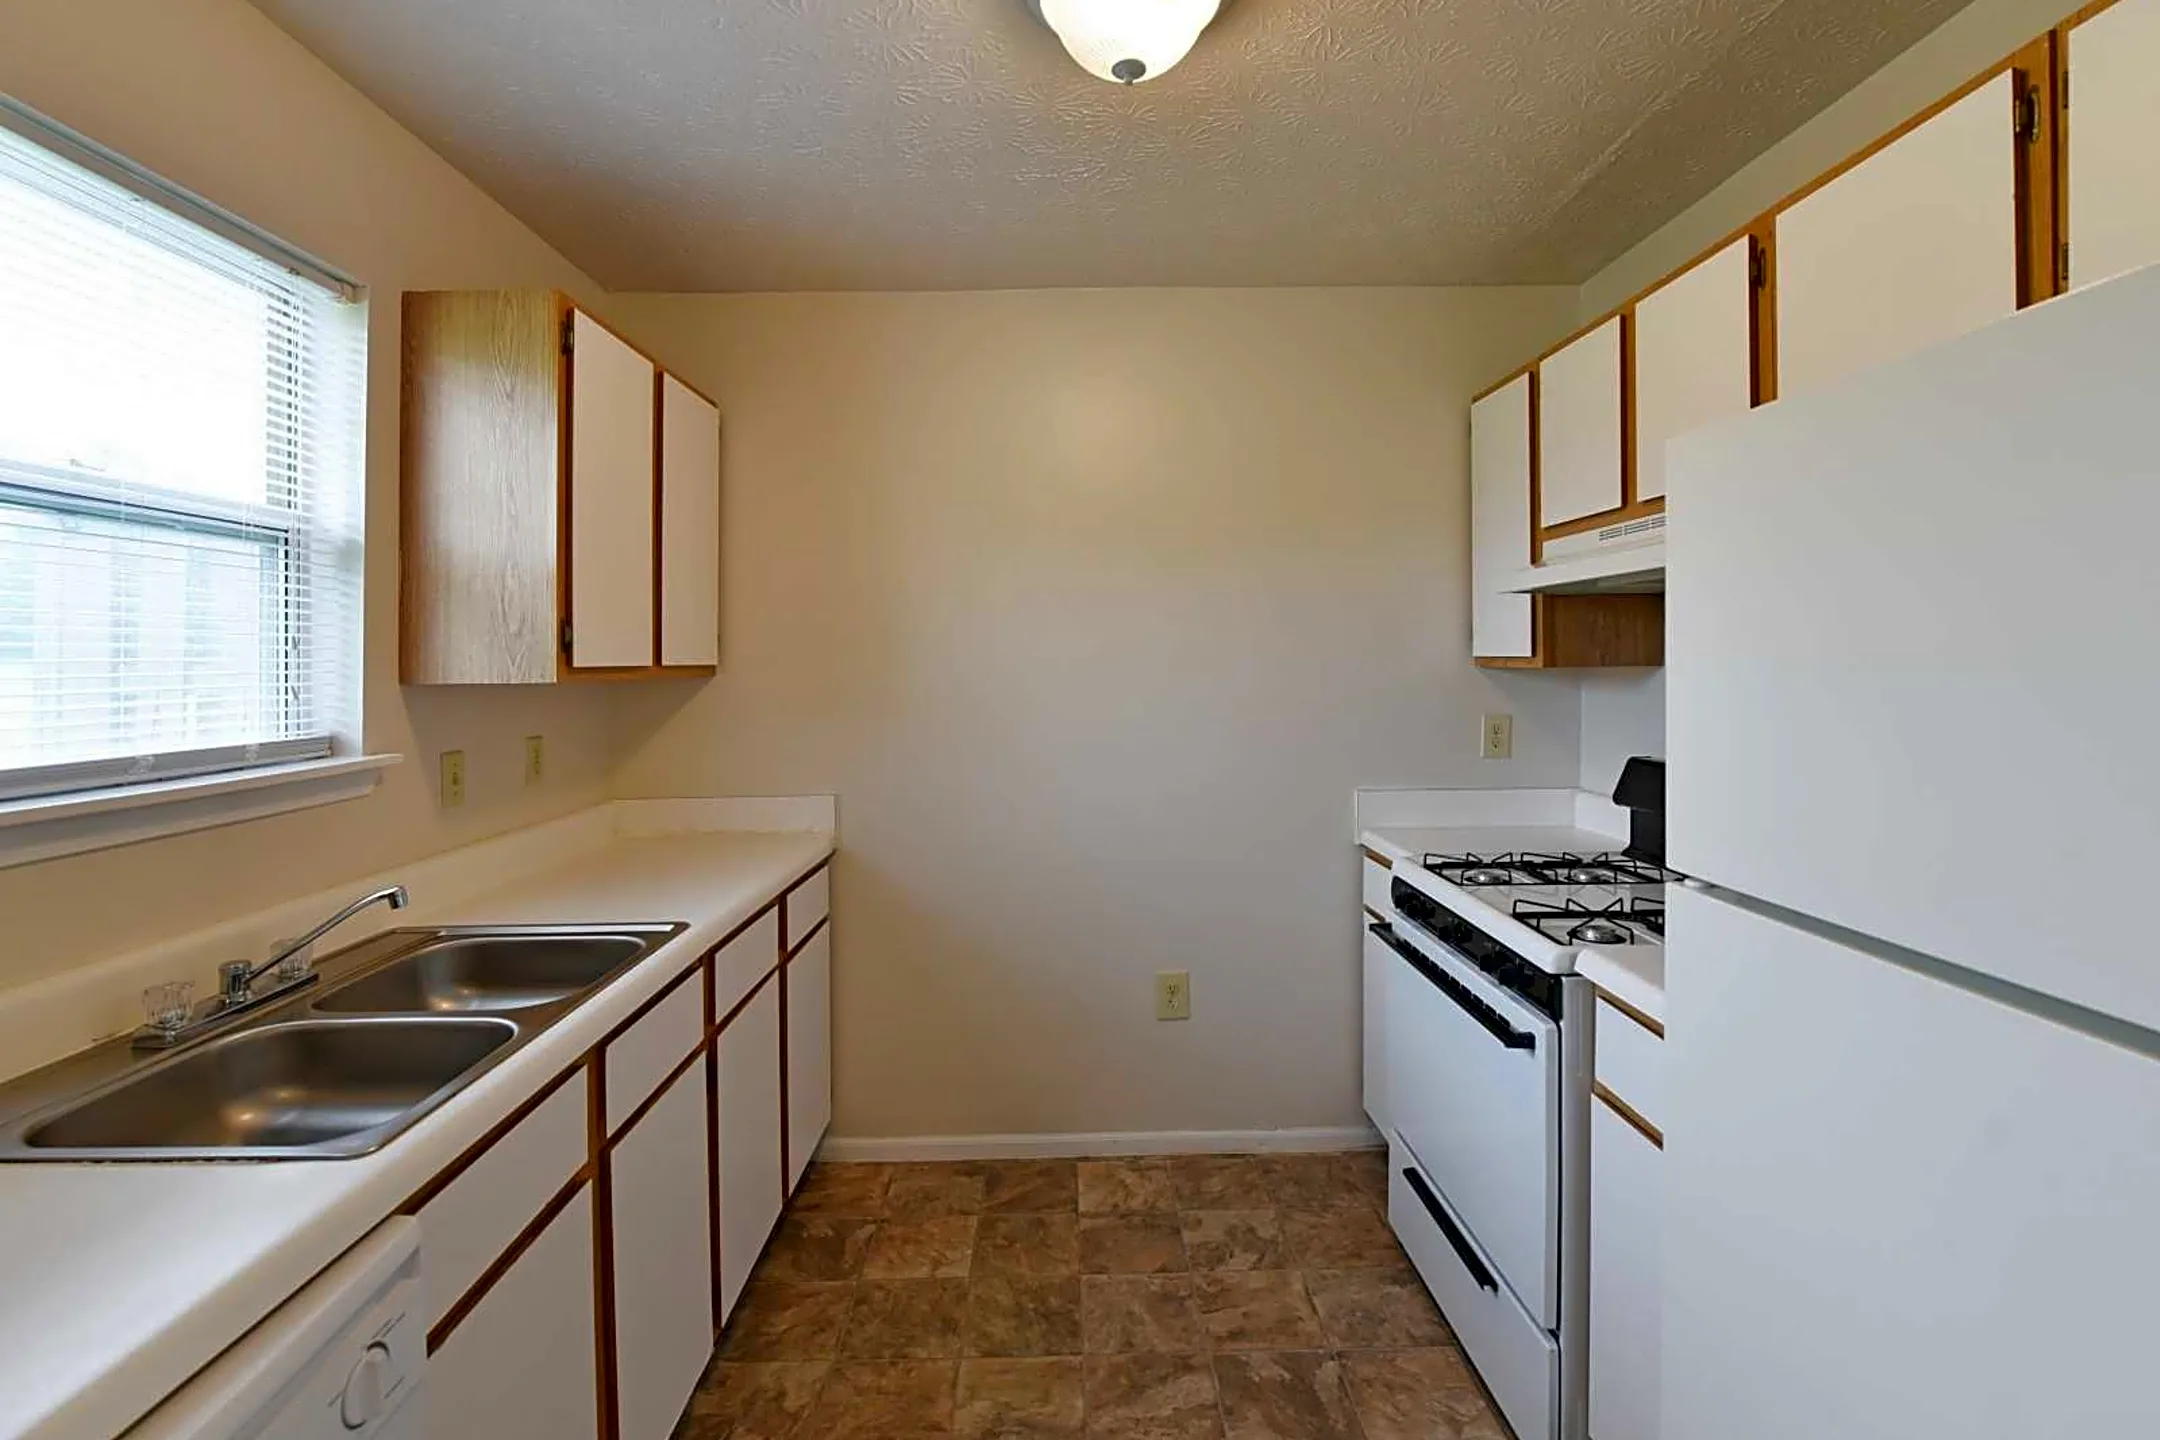 Kitchen - Bayberry Cove - Bellbrook, OH